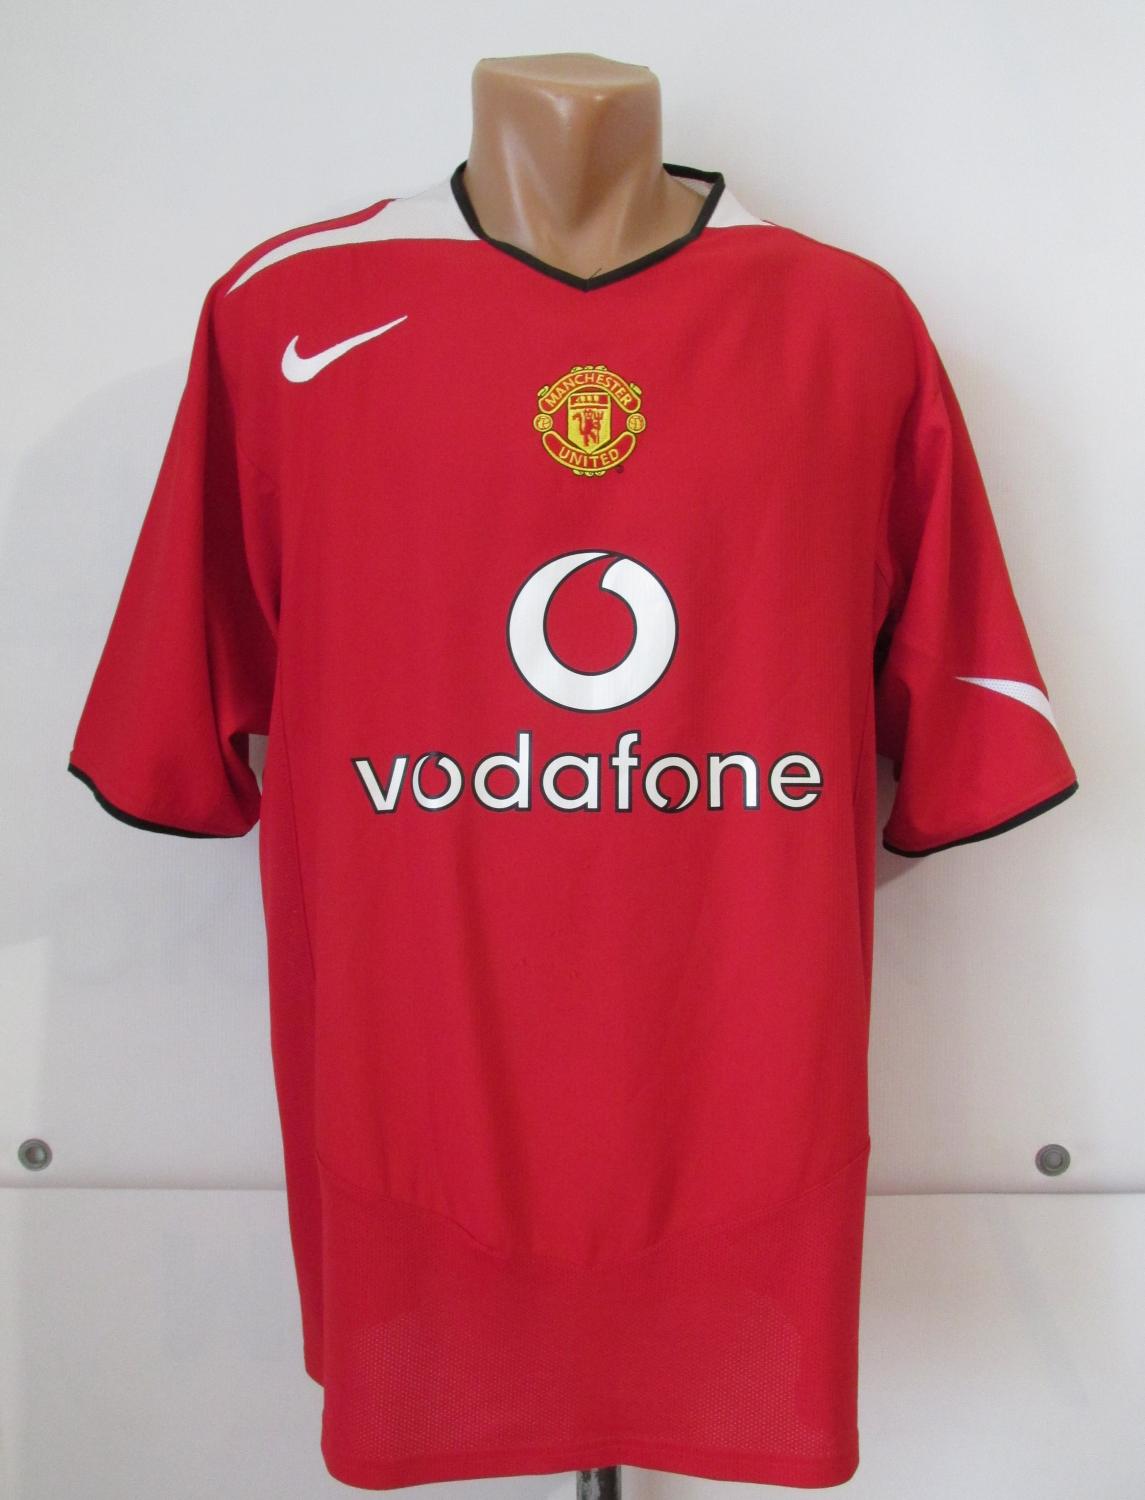 Manchester United Home football shirt 2004 - 2006. Sponsored by Vodafone